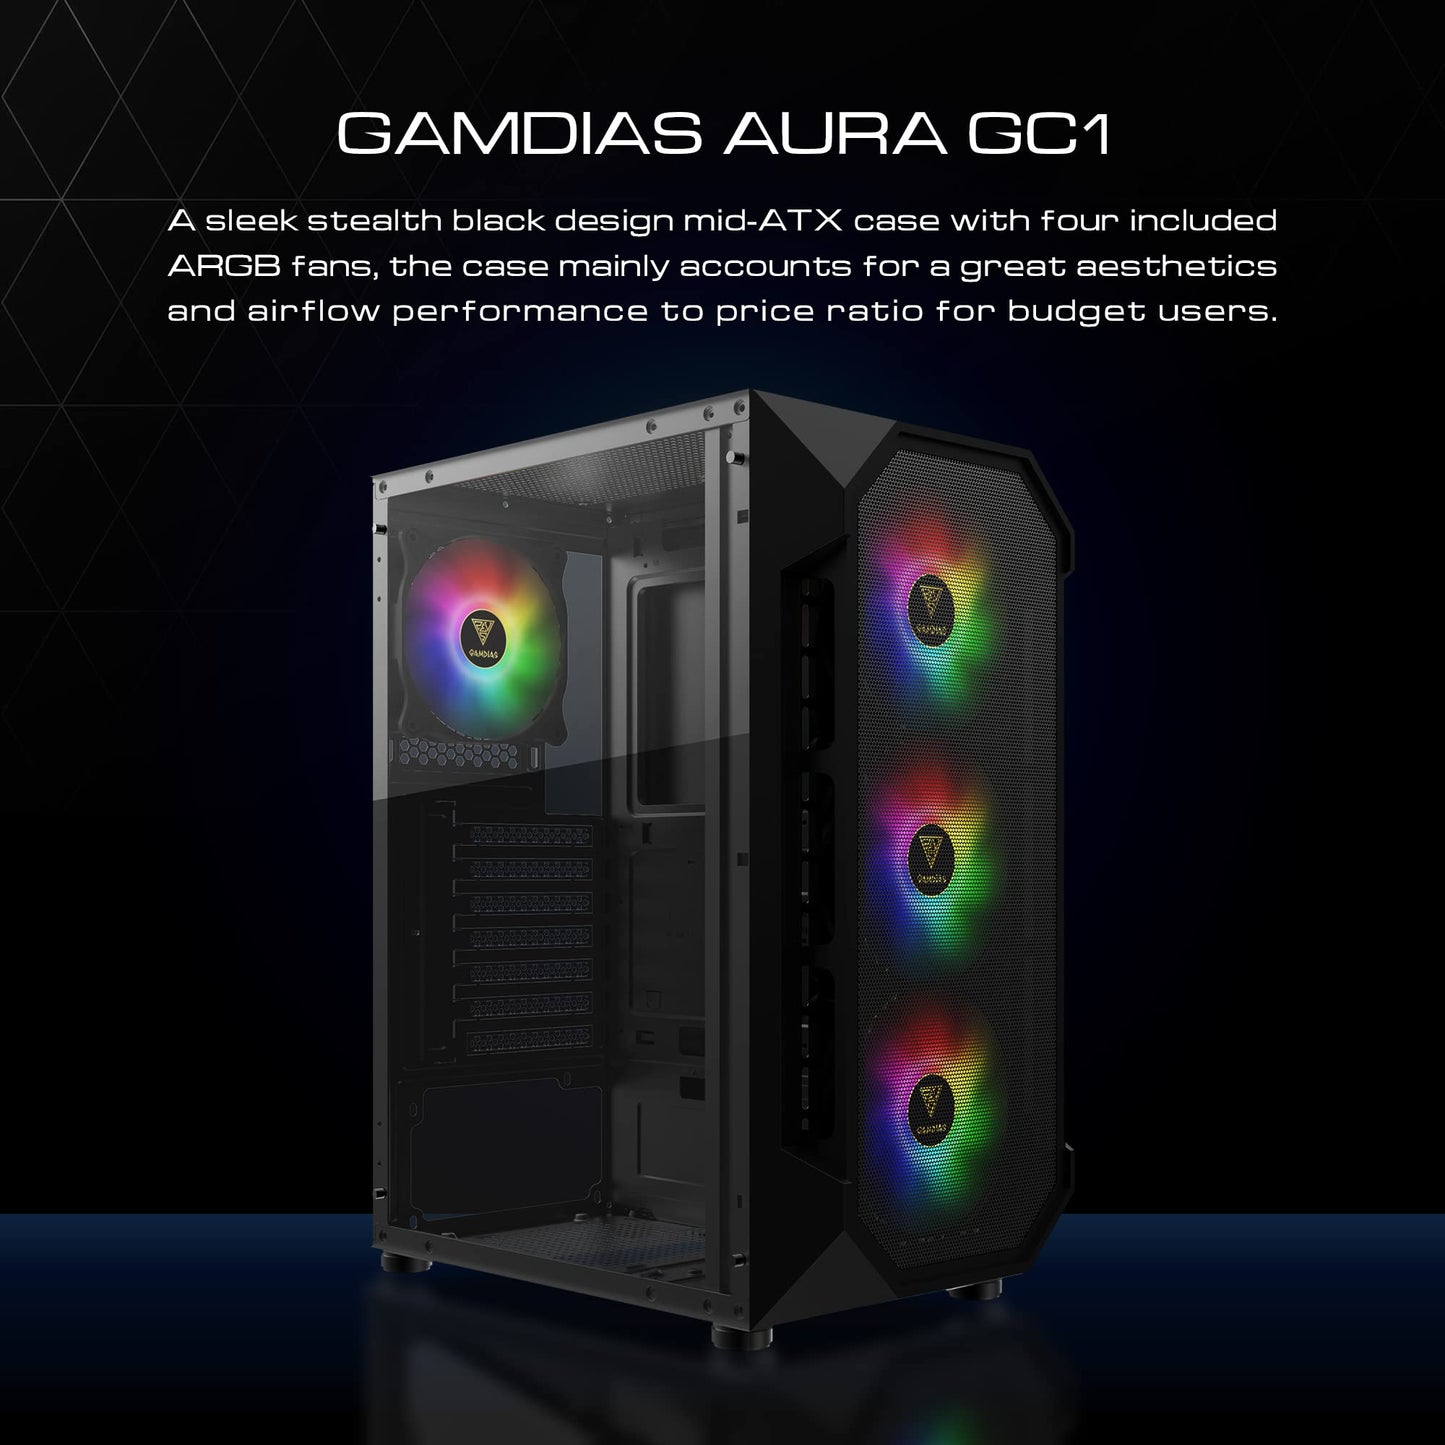 GAMDIAS ATX Mid Tower Gaming Computer PC Case with Side Tempered Glass, 4X 120mm ARGB Case Fans and Sync with 5V RGB Motherboard